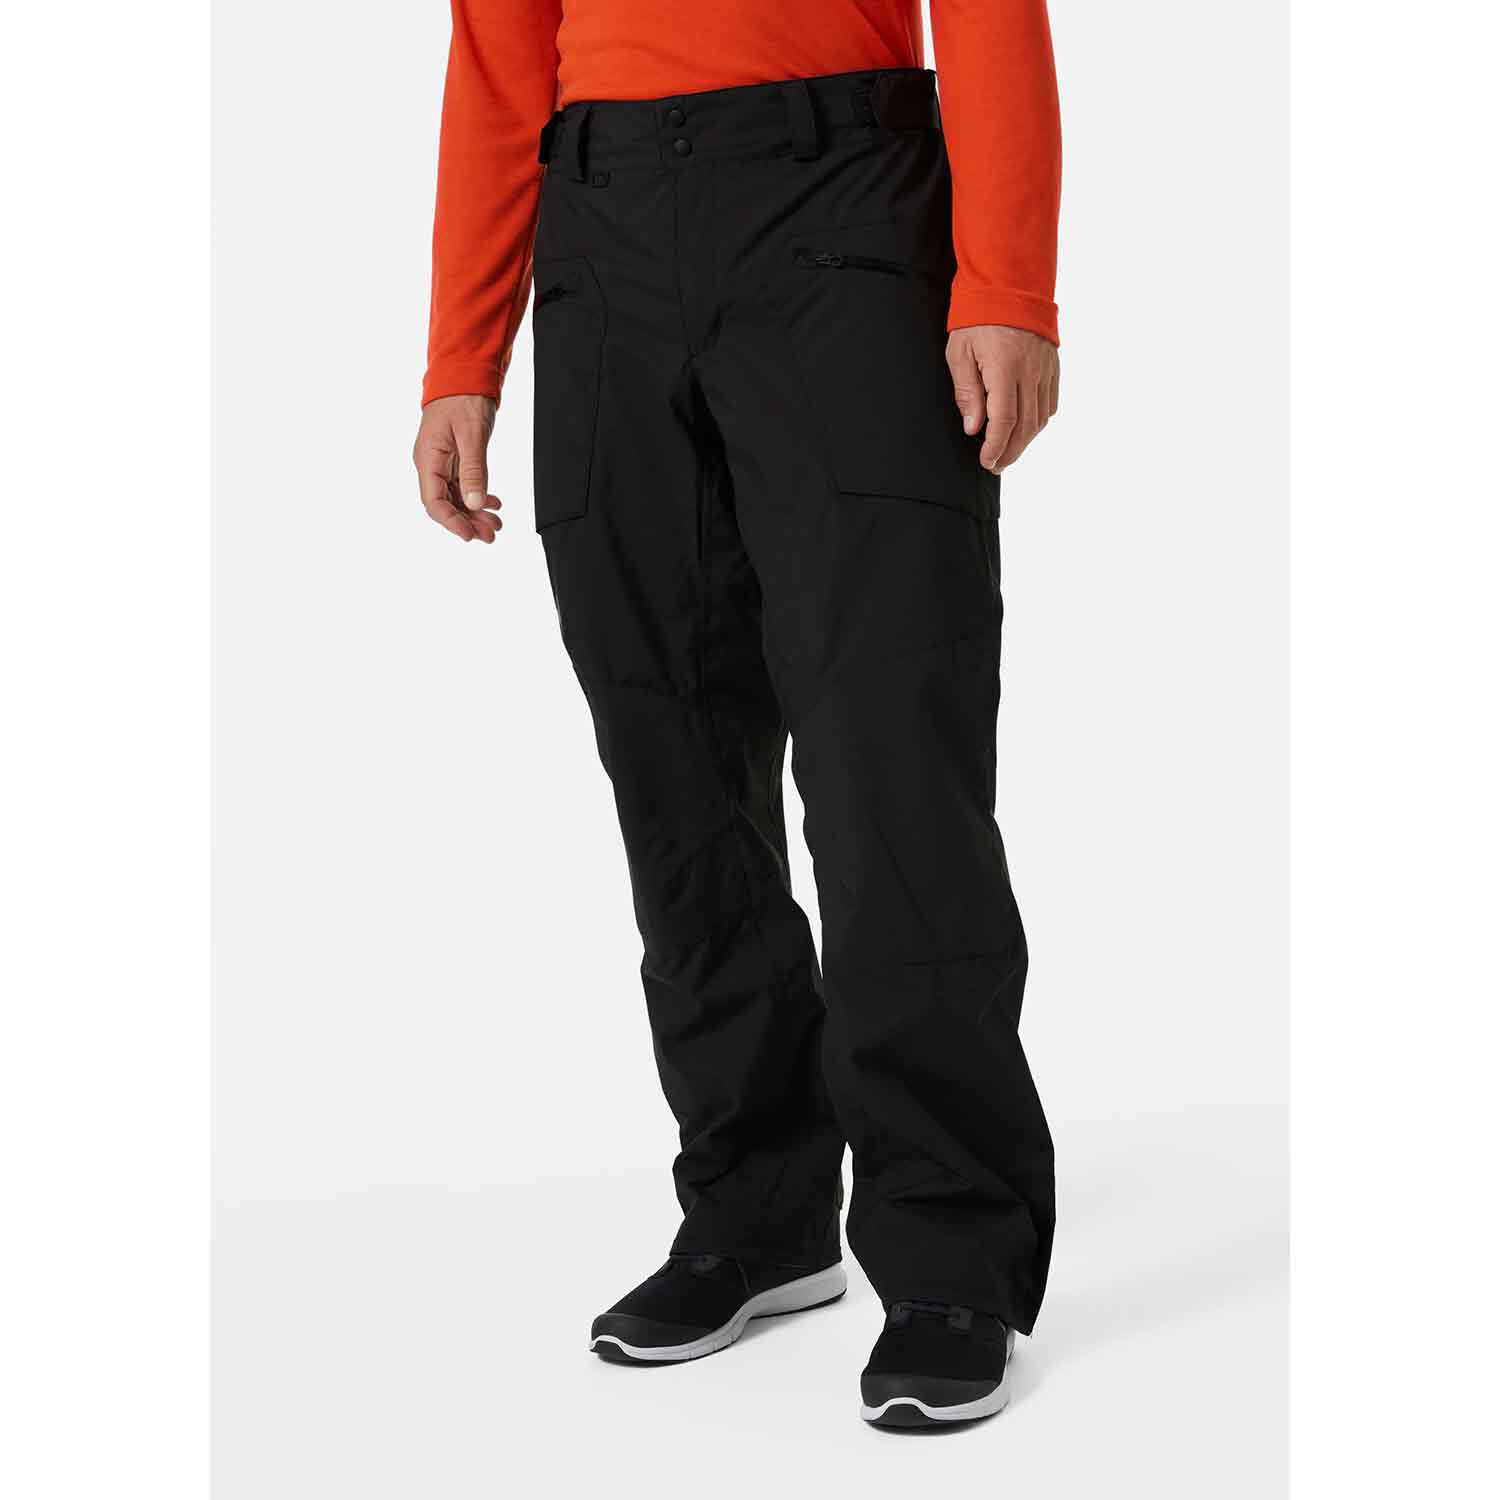 Waterproof Sailing Trousers For Sale - Pirates Cave Chandlery